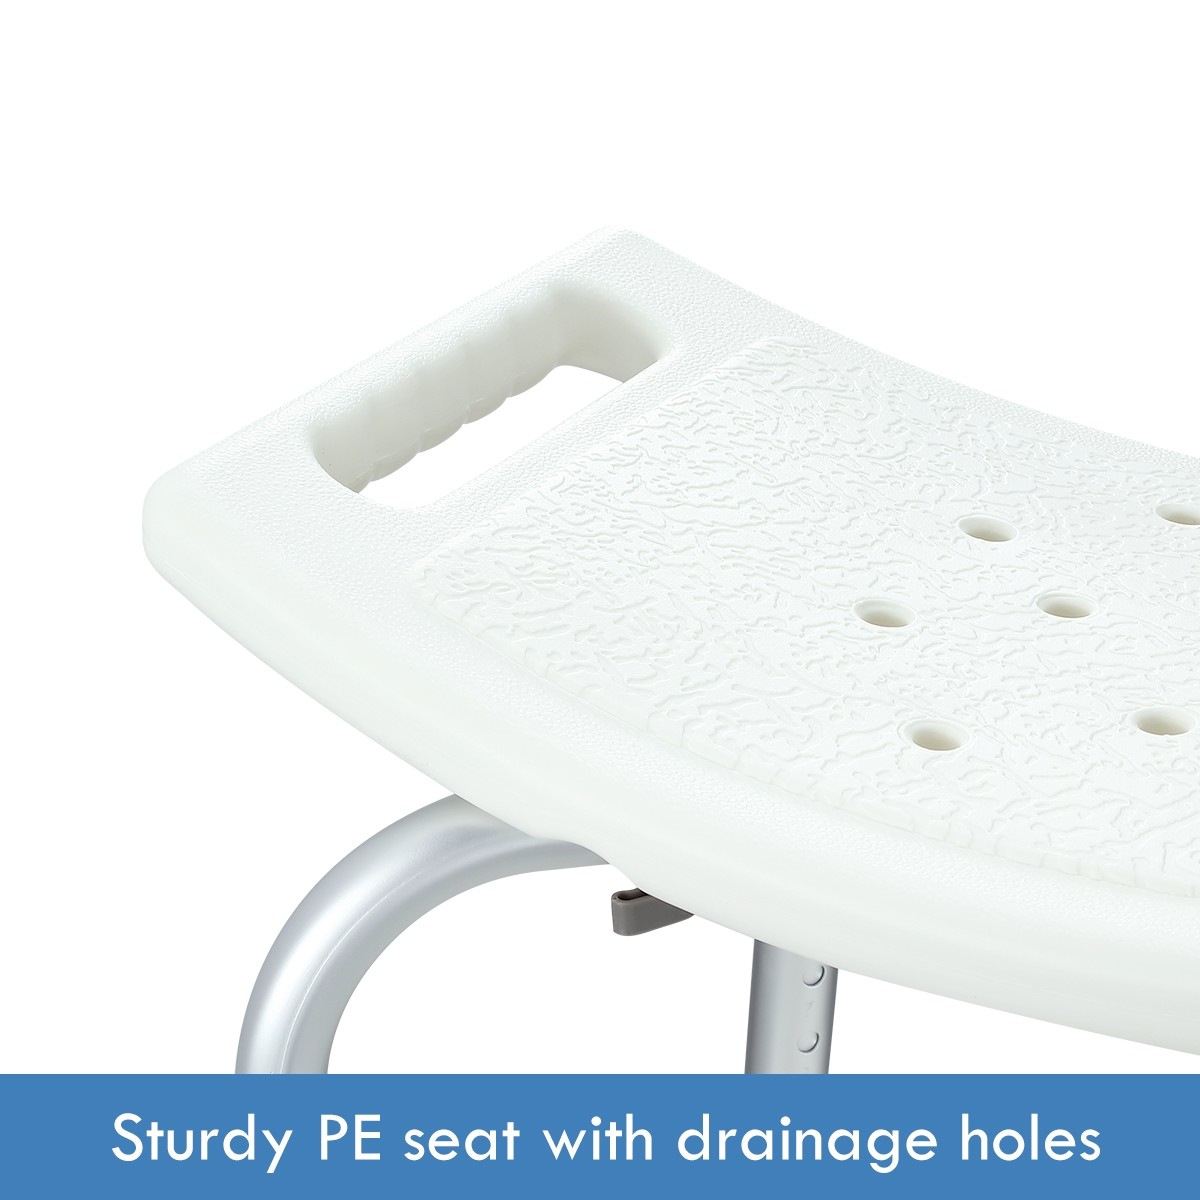 Adjustable Shower Chair - Two Options Available